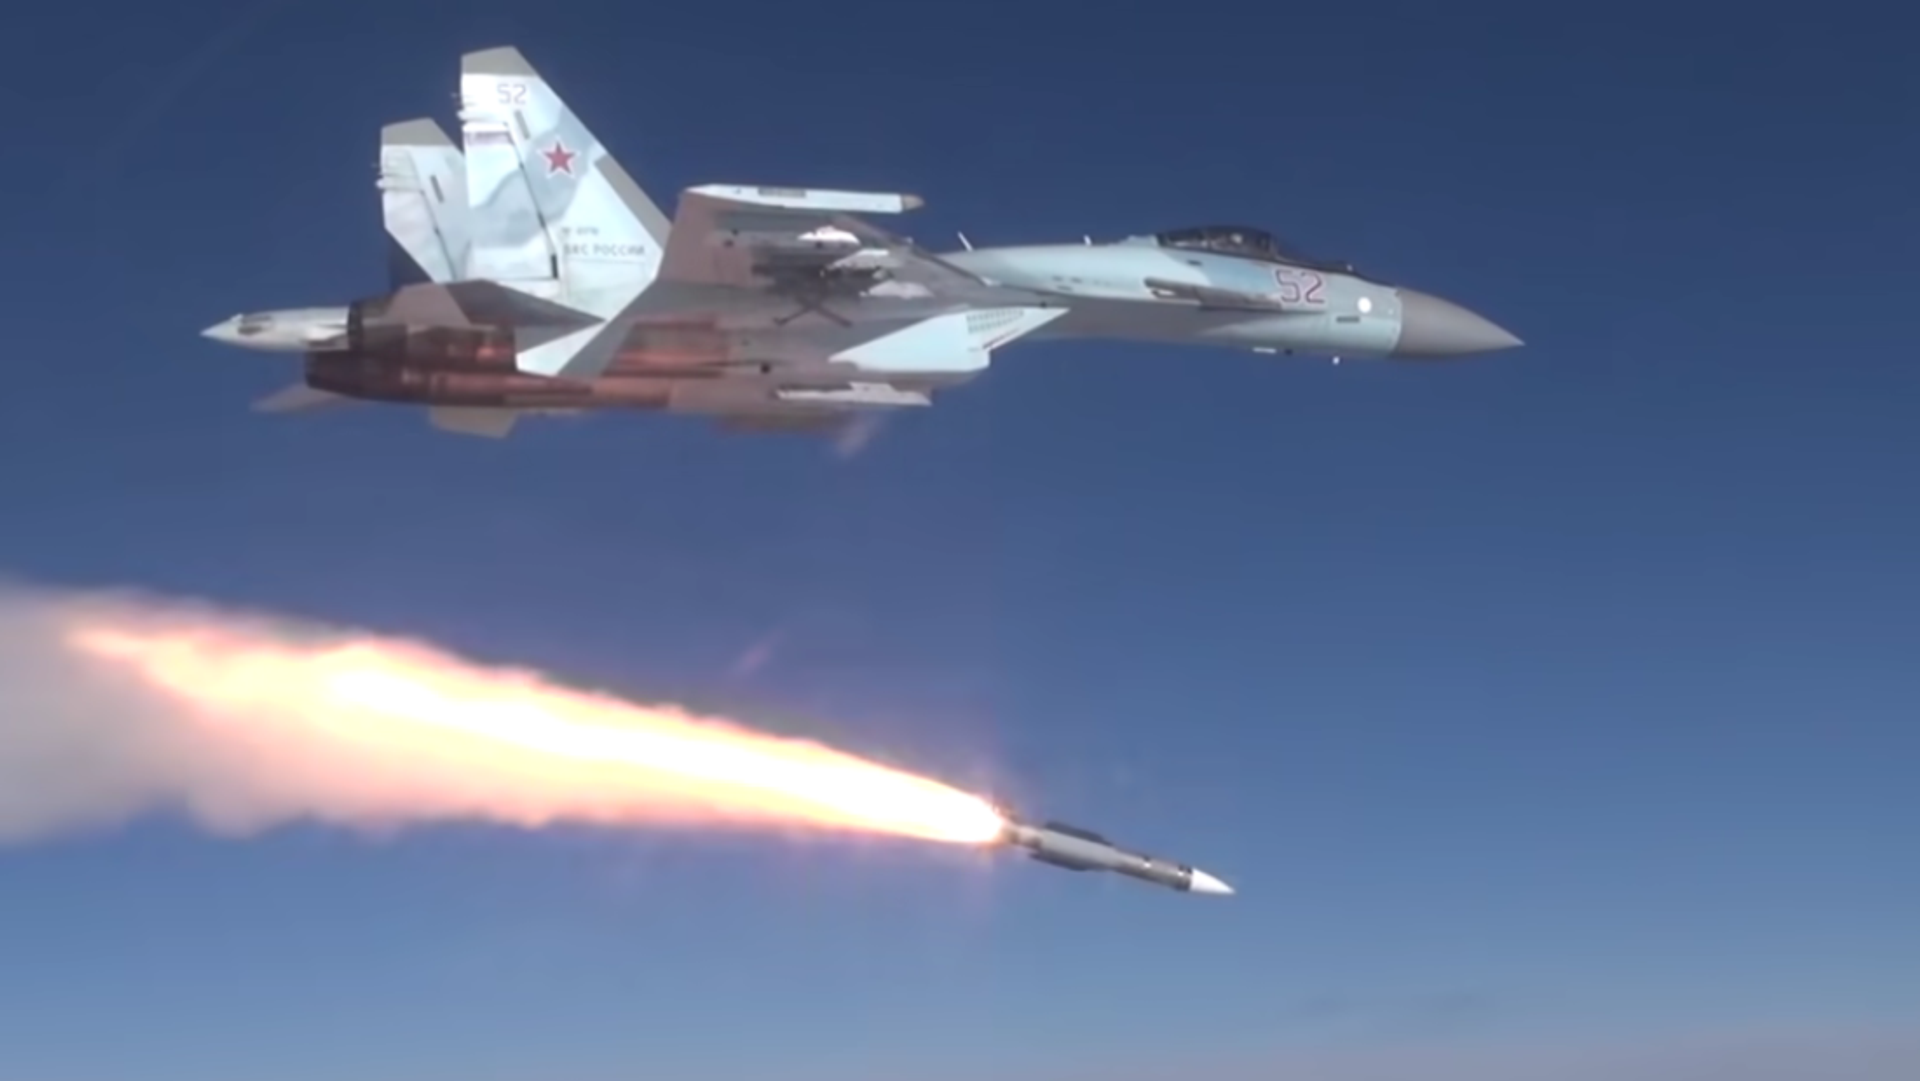 A Russian Su-35S fighter jet fires what appears to be an R-37M ultra-long-range air-to-air missile in a promotional video by the Russian Ministry of Defense - Sputnik International, 1920, 11.03.2023